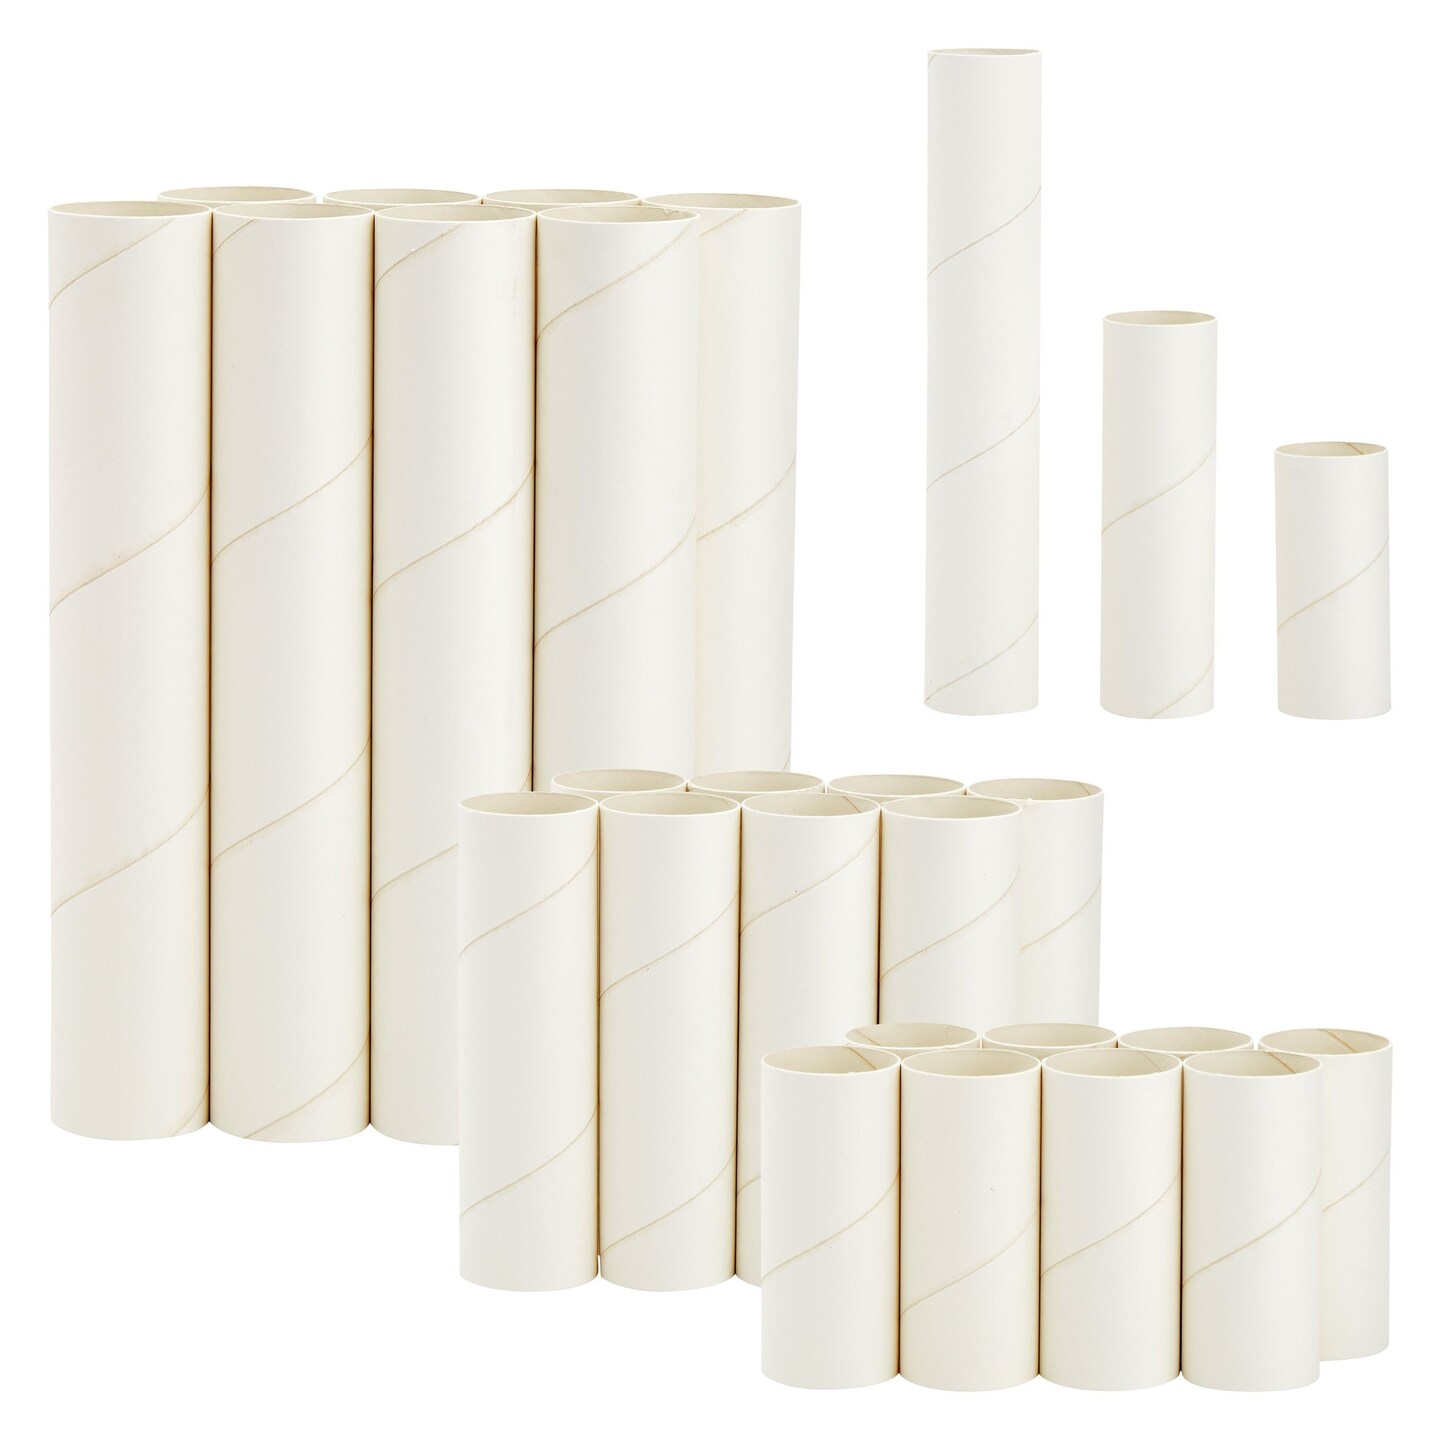 Lot of 100 Toilet Paper Tubes. Empty Cardboard Rolls. Recycled Paper  Cylinder Supplies for Upcycled Craft Projects. 